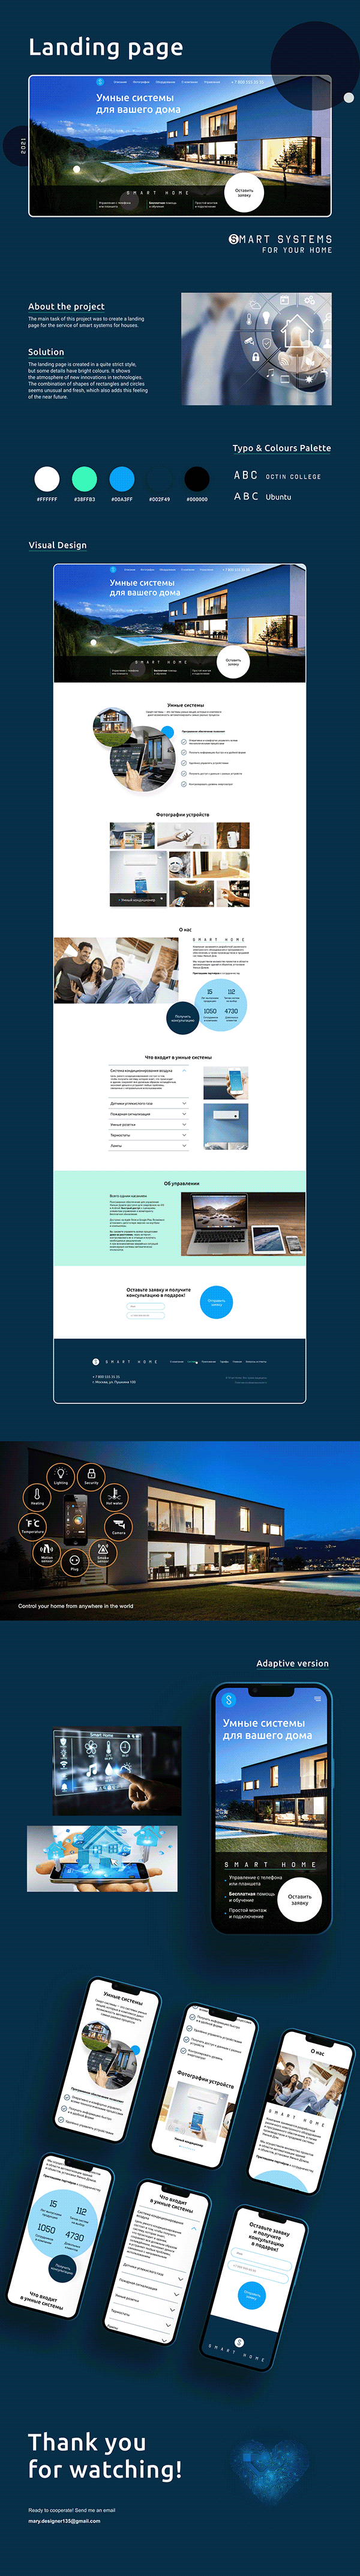 Landing page (Smart Home), smart systems